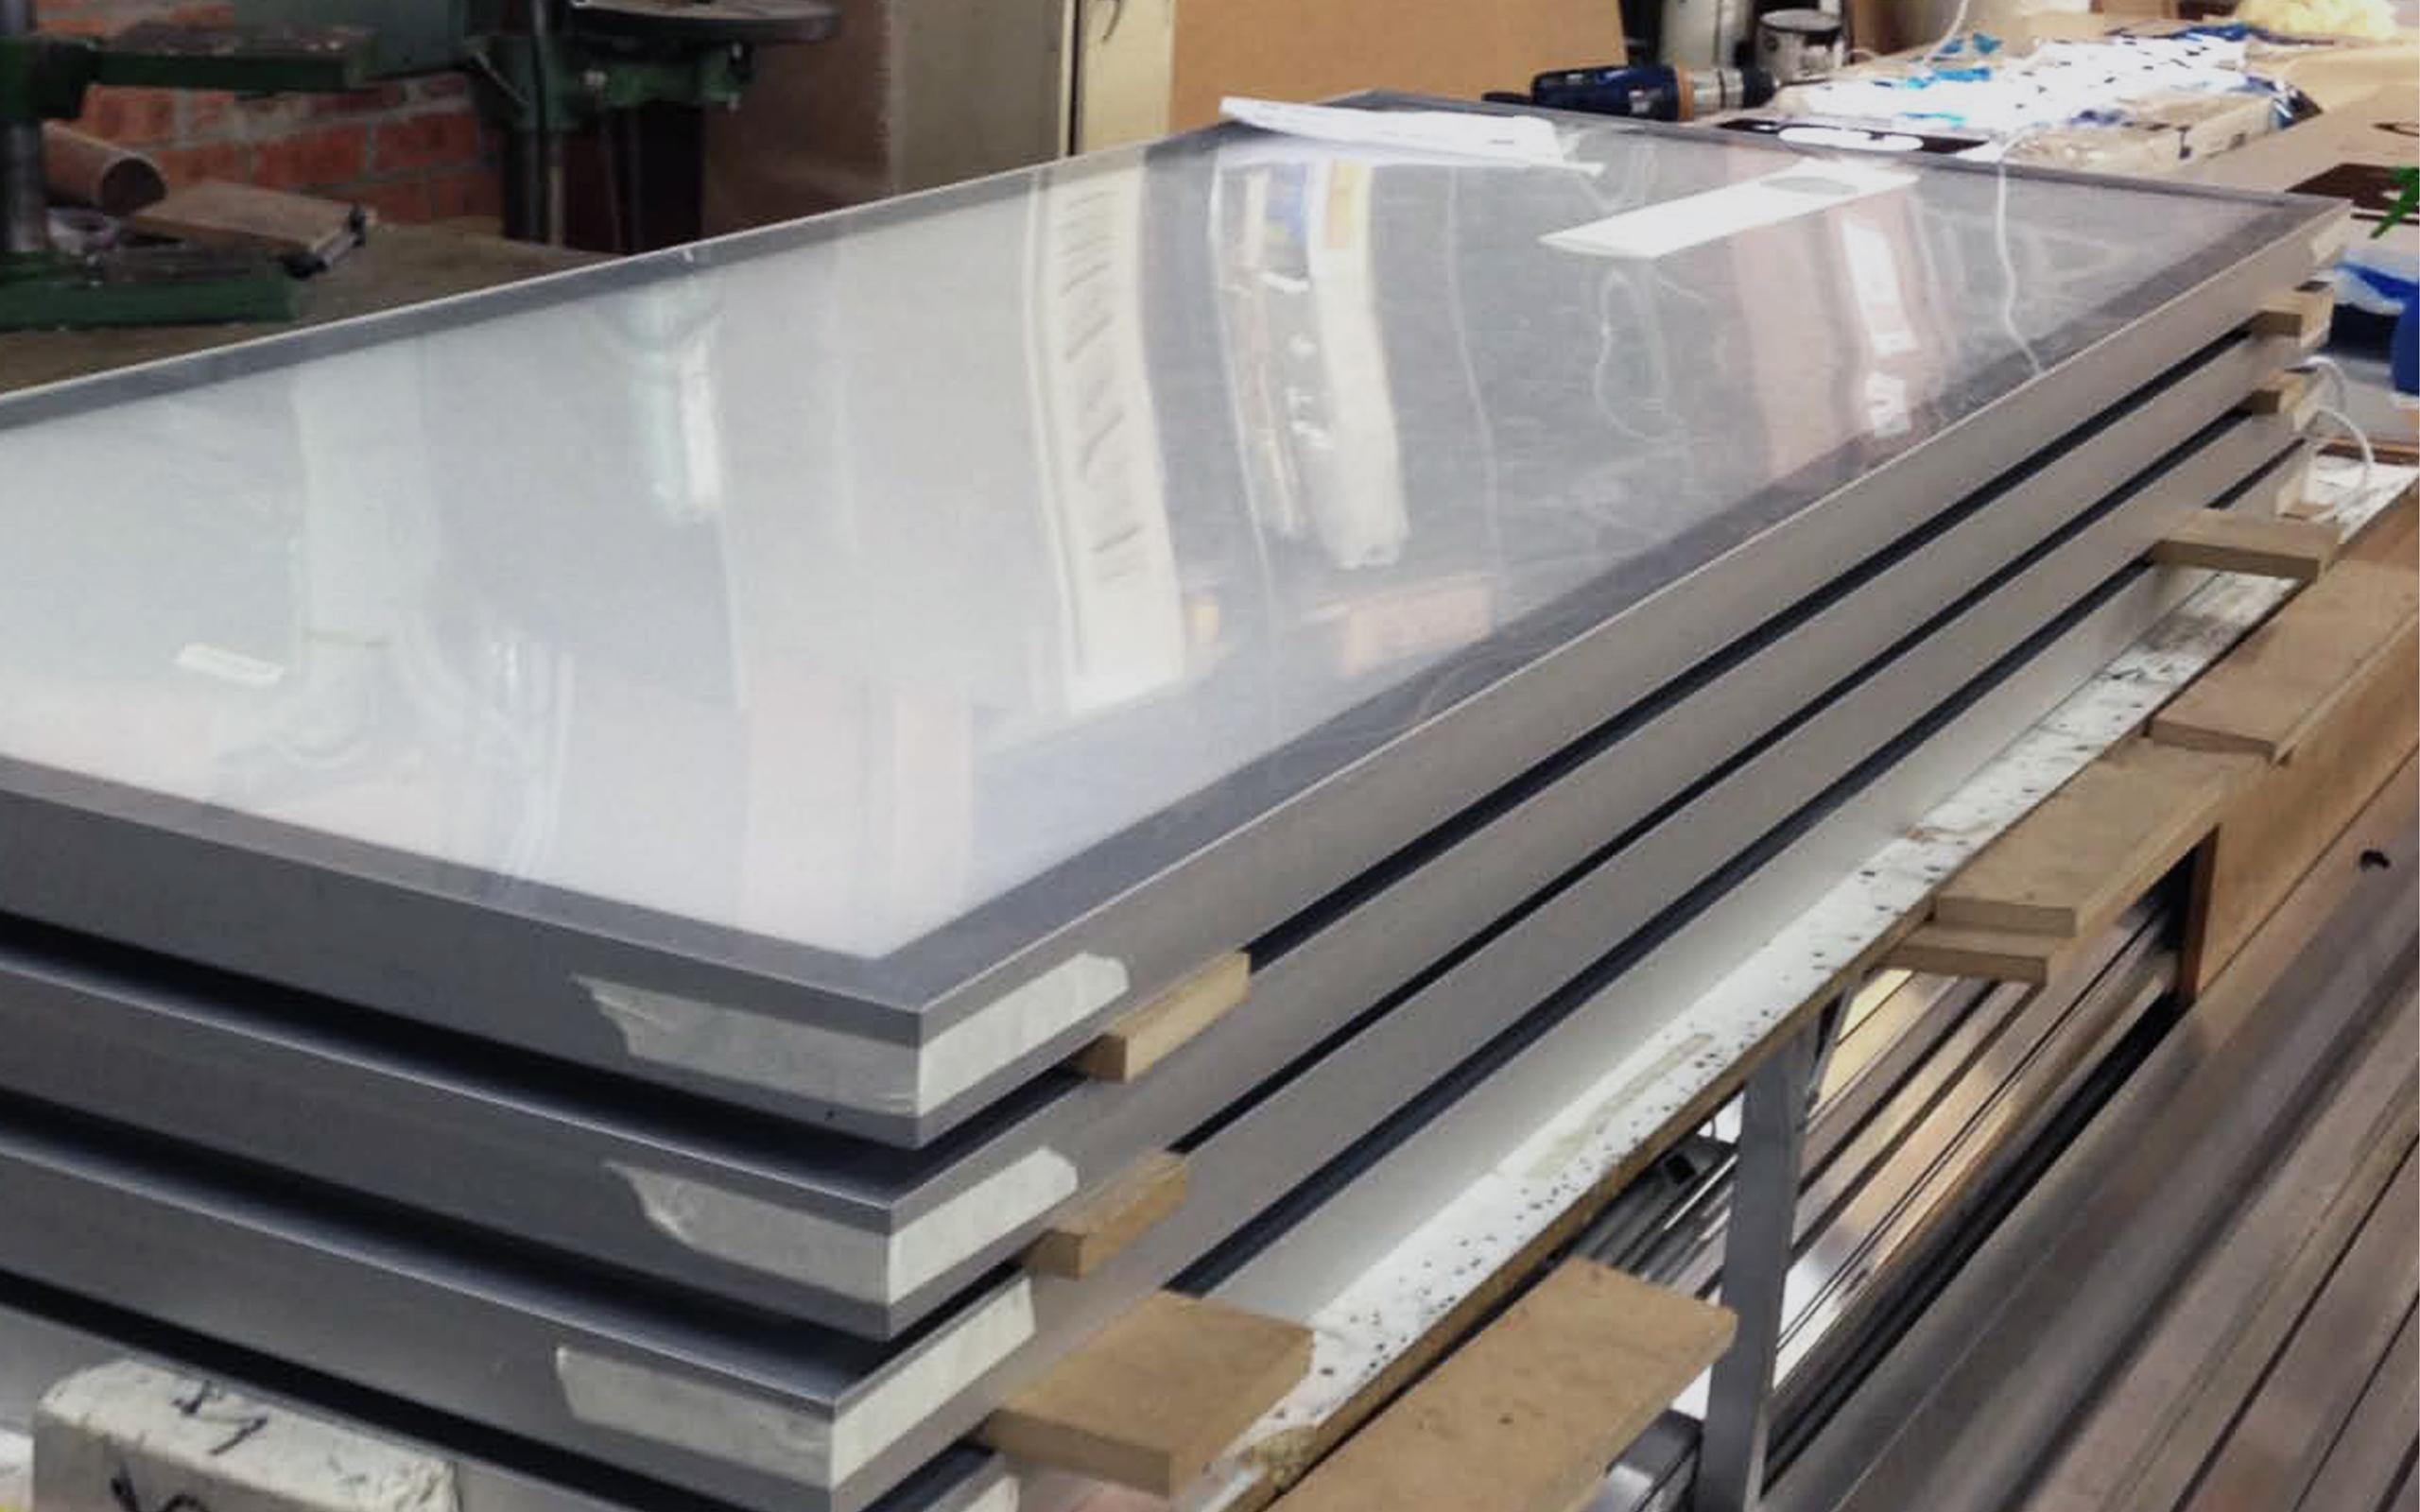 slim-line light-boxes in production